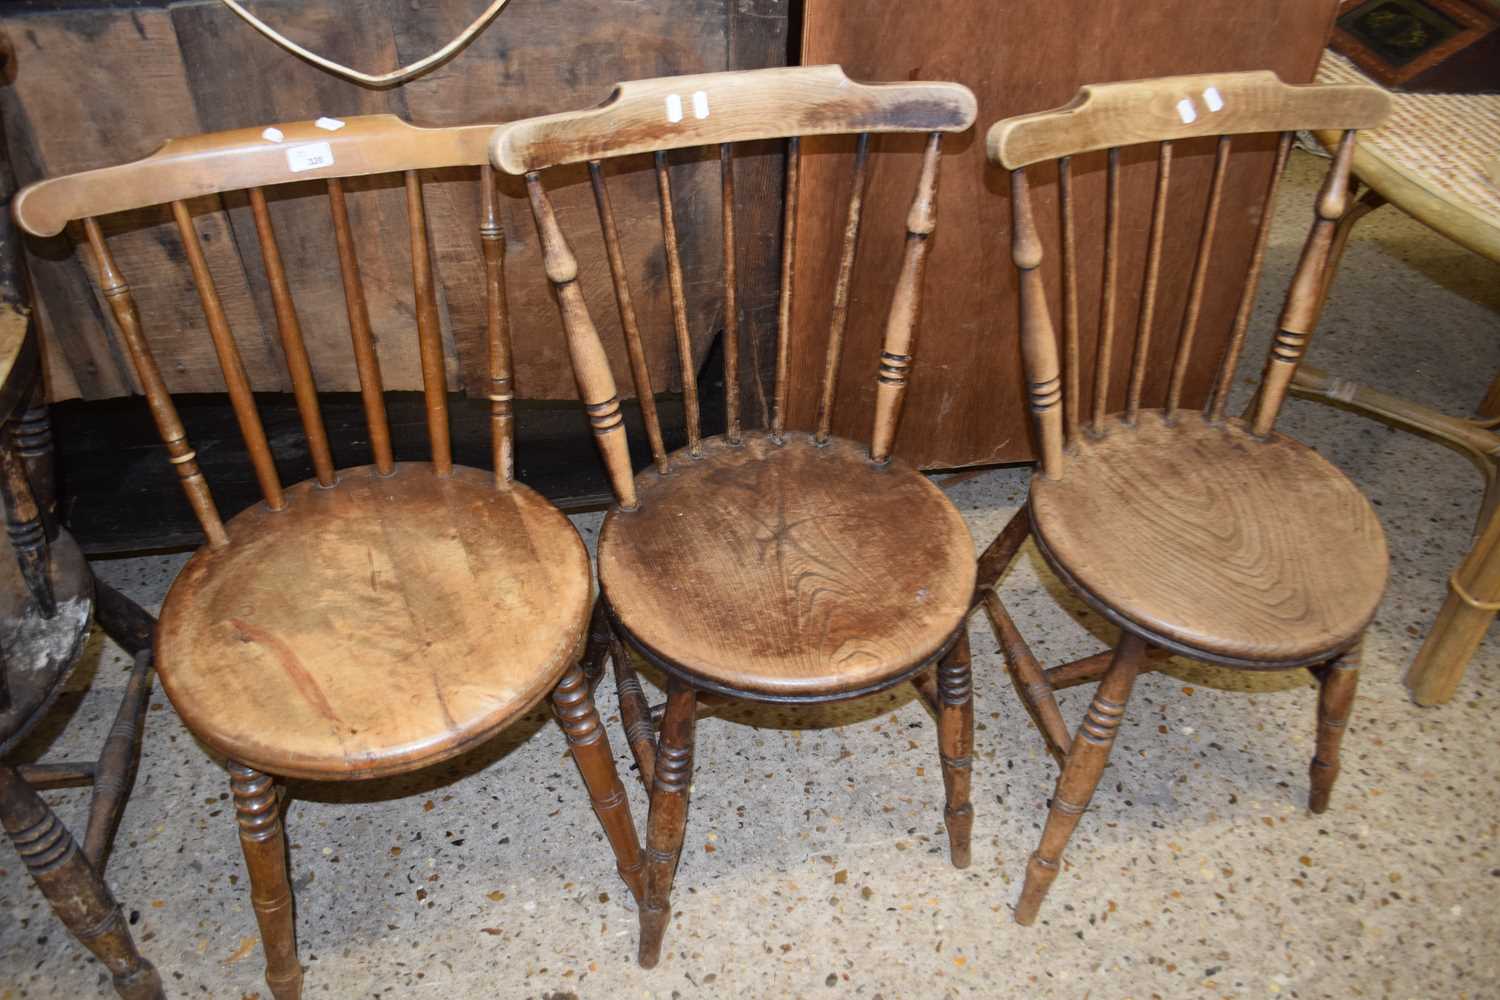 THREE VICTORIAN ELM SEATED STICK BACK KITCHEN CHAIRS